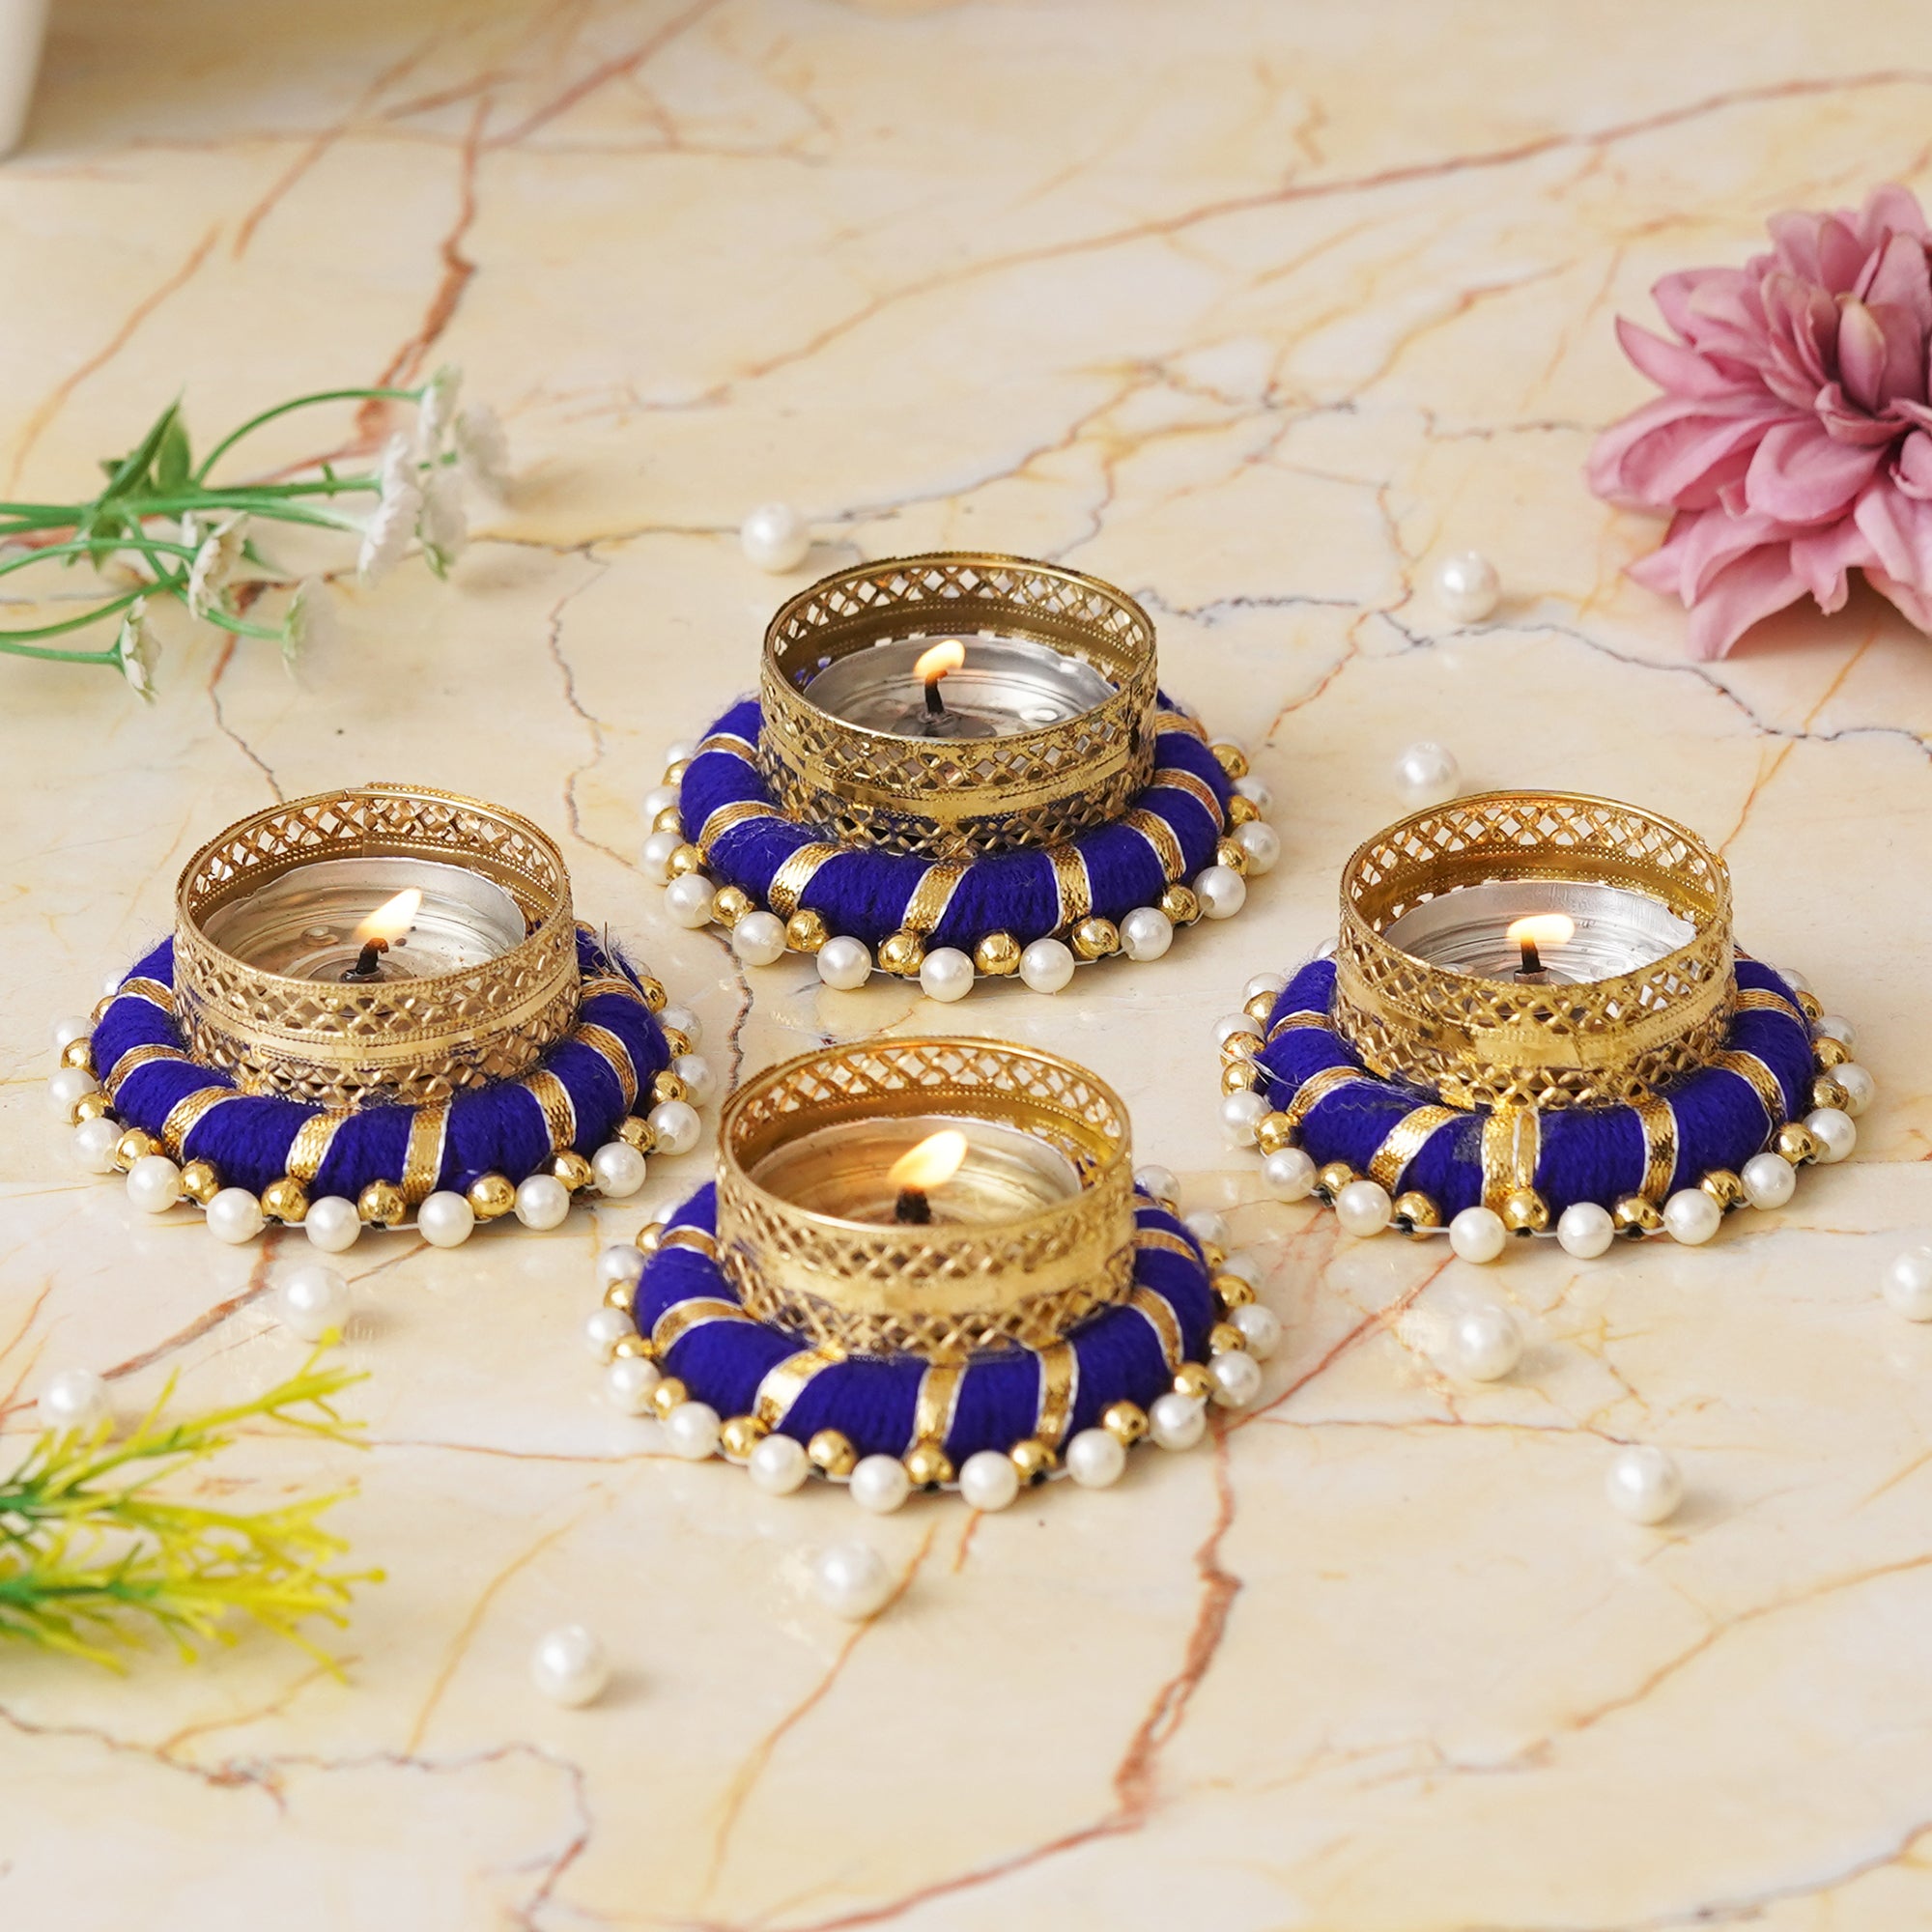 eCraftIndia Set of 4 Golden and Blue Round Shaped Beaded Decorative Tea Light Candle Holders 4